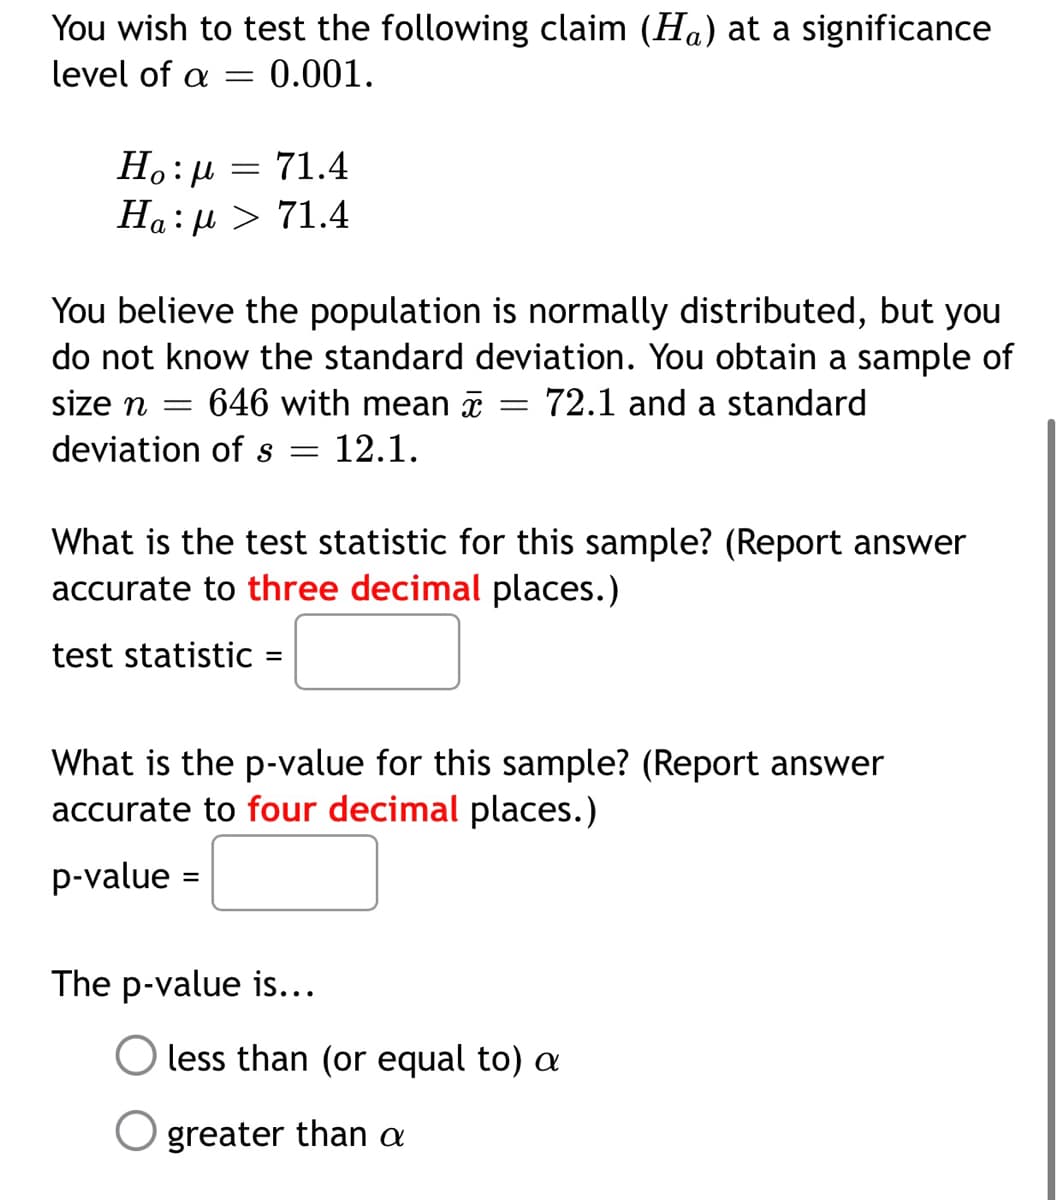 You wish to test the following claim (Ha) at a significance
level of a =
0.001.
Ho:µ = 71.4
Ha: µ > 71.4
You believe the population is normally distributed, but you
do not know the standard deviation. You obtain a sample of
size n =
646 with mean a
72.1 and a standard
deviation of s =
12.1.
What is the test statistic for this sample? (Report answer
accurate to three decimal places.)
test statistic
What is the p-value for this sample? (Report answer
accurate to four decimal places.)
p-value =
The p-value is...
less than (or equal to) a
O greater than a
